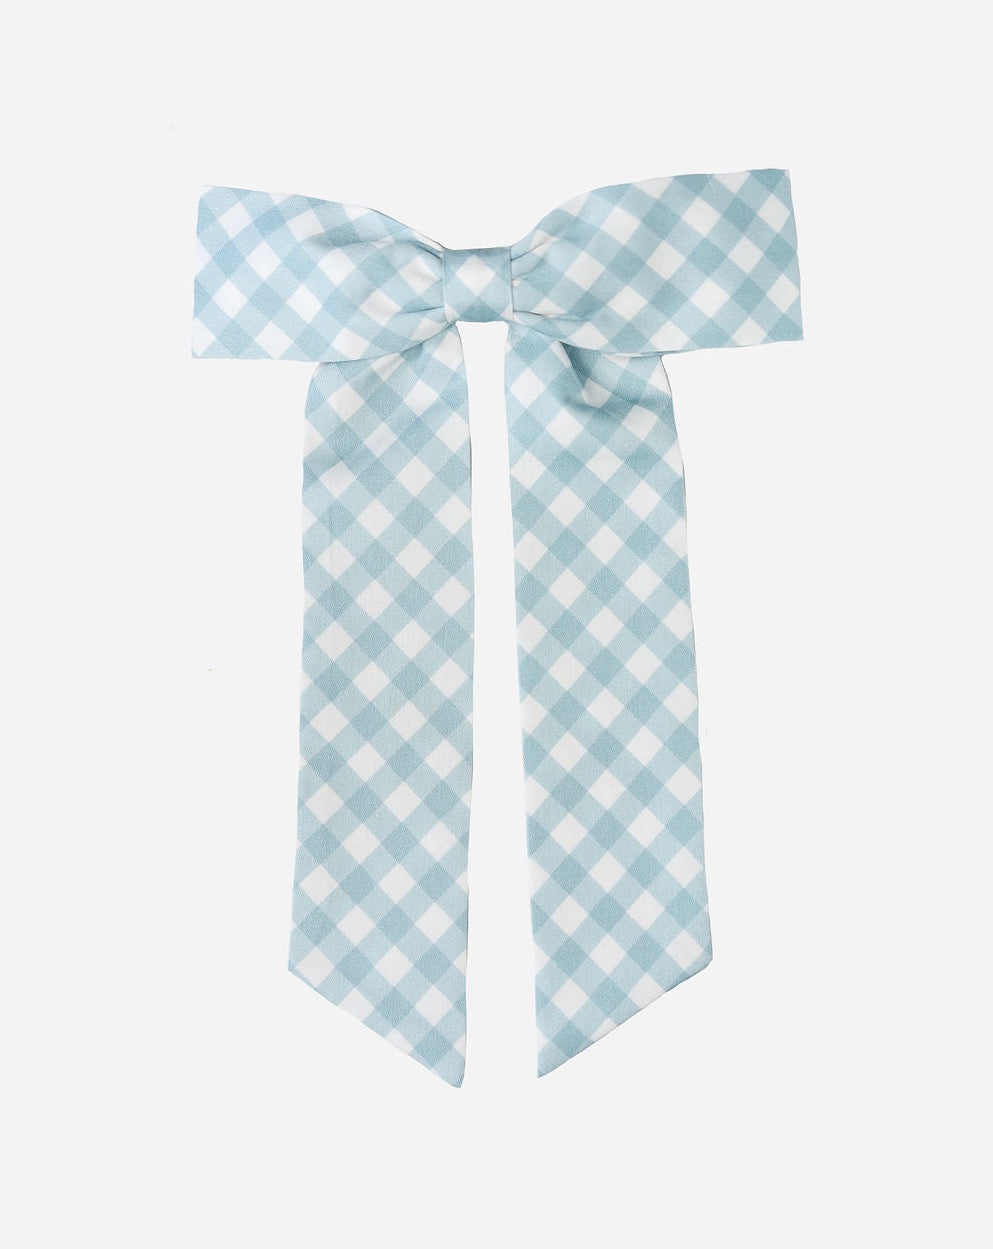 Trianon Bow - Gingham